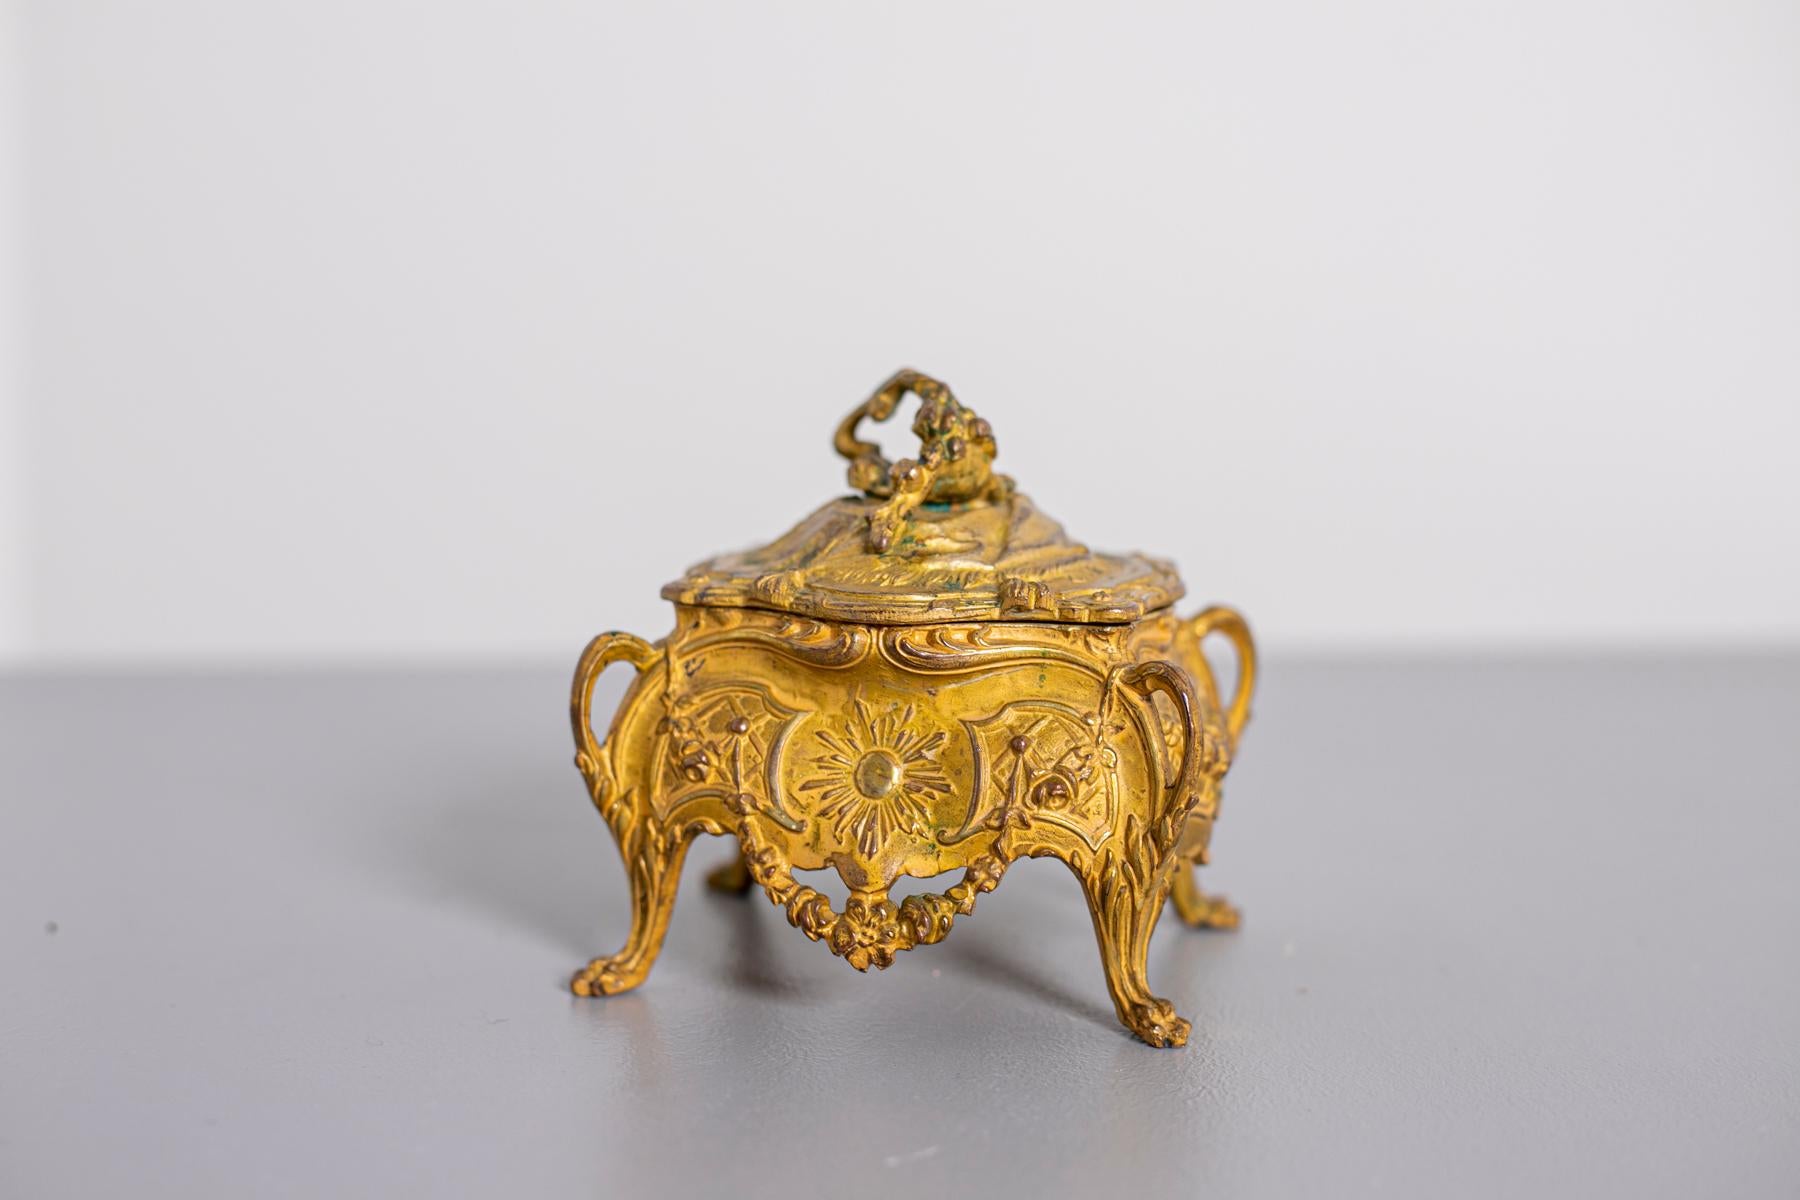 Jewelry box numbered below on the bottom. France Paris 1800, gilded metal. Interior with period silk satin padding. Precious and splendid antique jewelry box. The jewelry box is made of golden metal. Its main feature is the details on its surface.